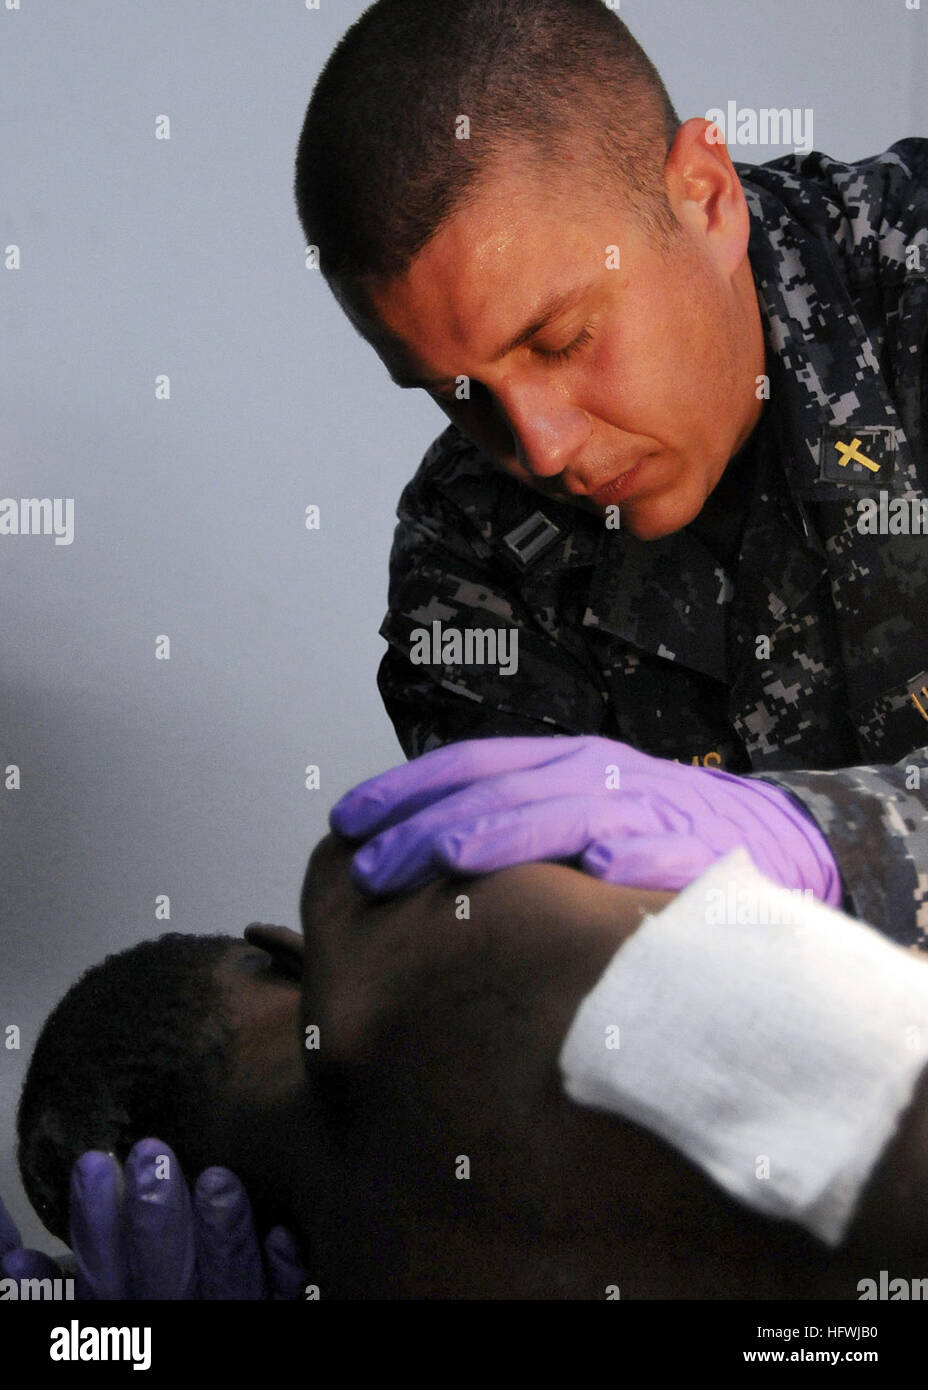 100120-N-6247V-034 KILLICK, Haiti (Jan. 20, 2010) Lt. Marlin Williams, a Navy chaplain embarked aboard the aircraft carrier USS Carl Vinson (CVN 70), prays for a Haitian boy as he receives treatment at the Killick Haitian Coast Guard Clinic. The boy was trapped under the bodies of dead family members in a collapsed building for seven days before he was rescued from the rubble. Carl Vinson and Carrier Air Wing (CVW) 17 are conducting humanitarian and disaster relief operations as part of Operation Unified Response after a 7.0 magnitude earthquake caused severe damage near Port-au-Prince on Jan. Stock Photo